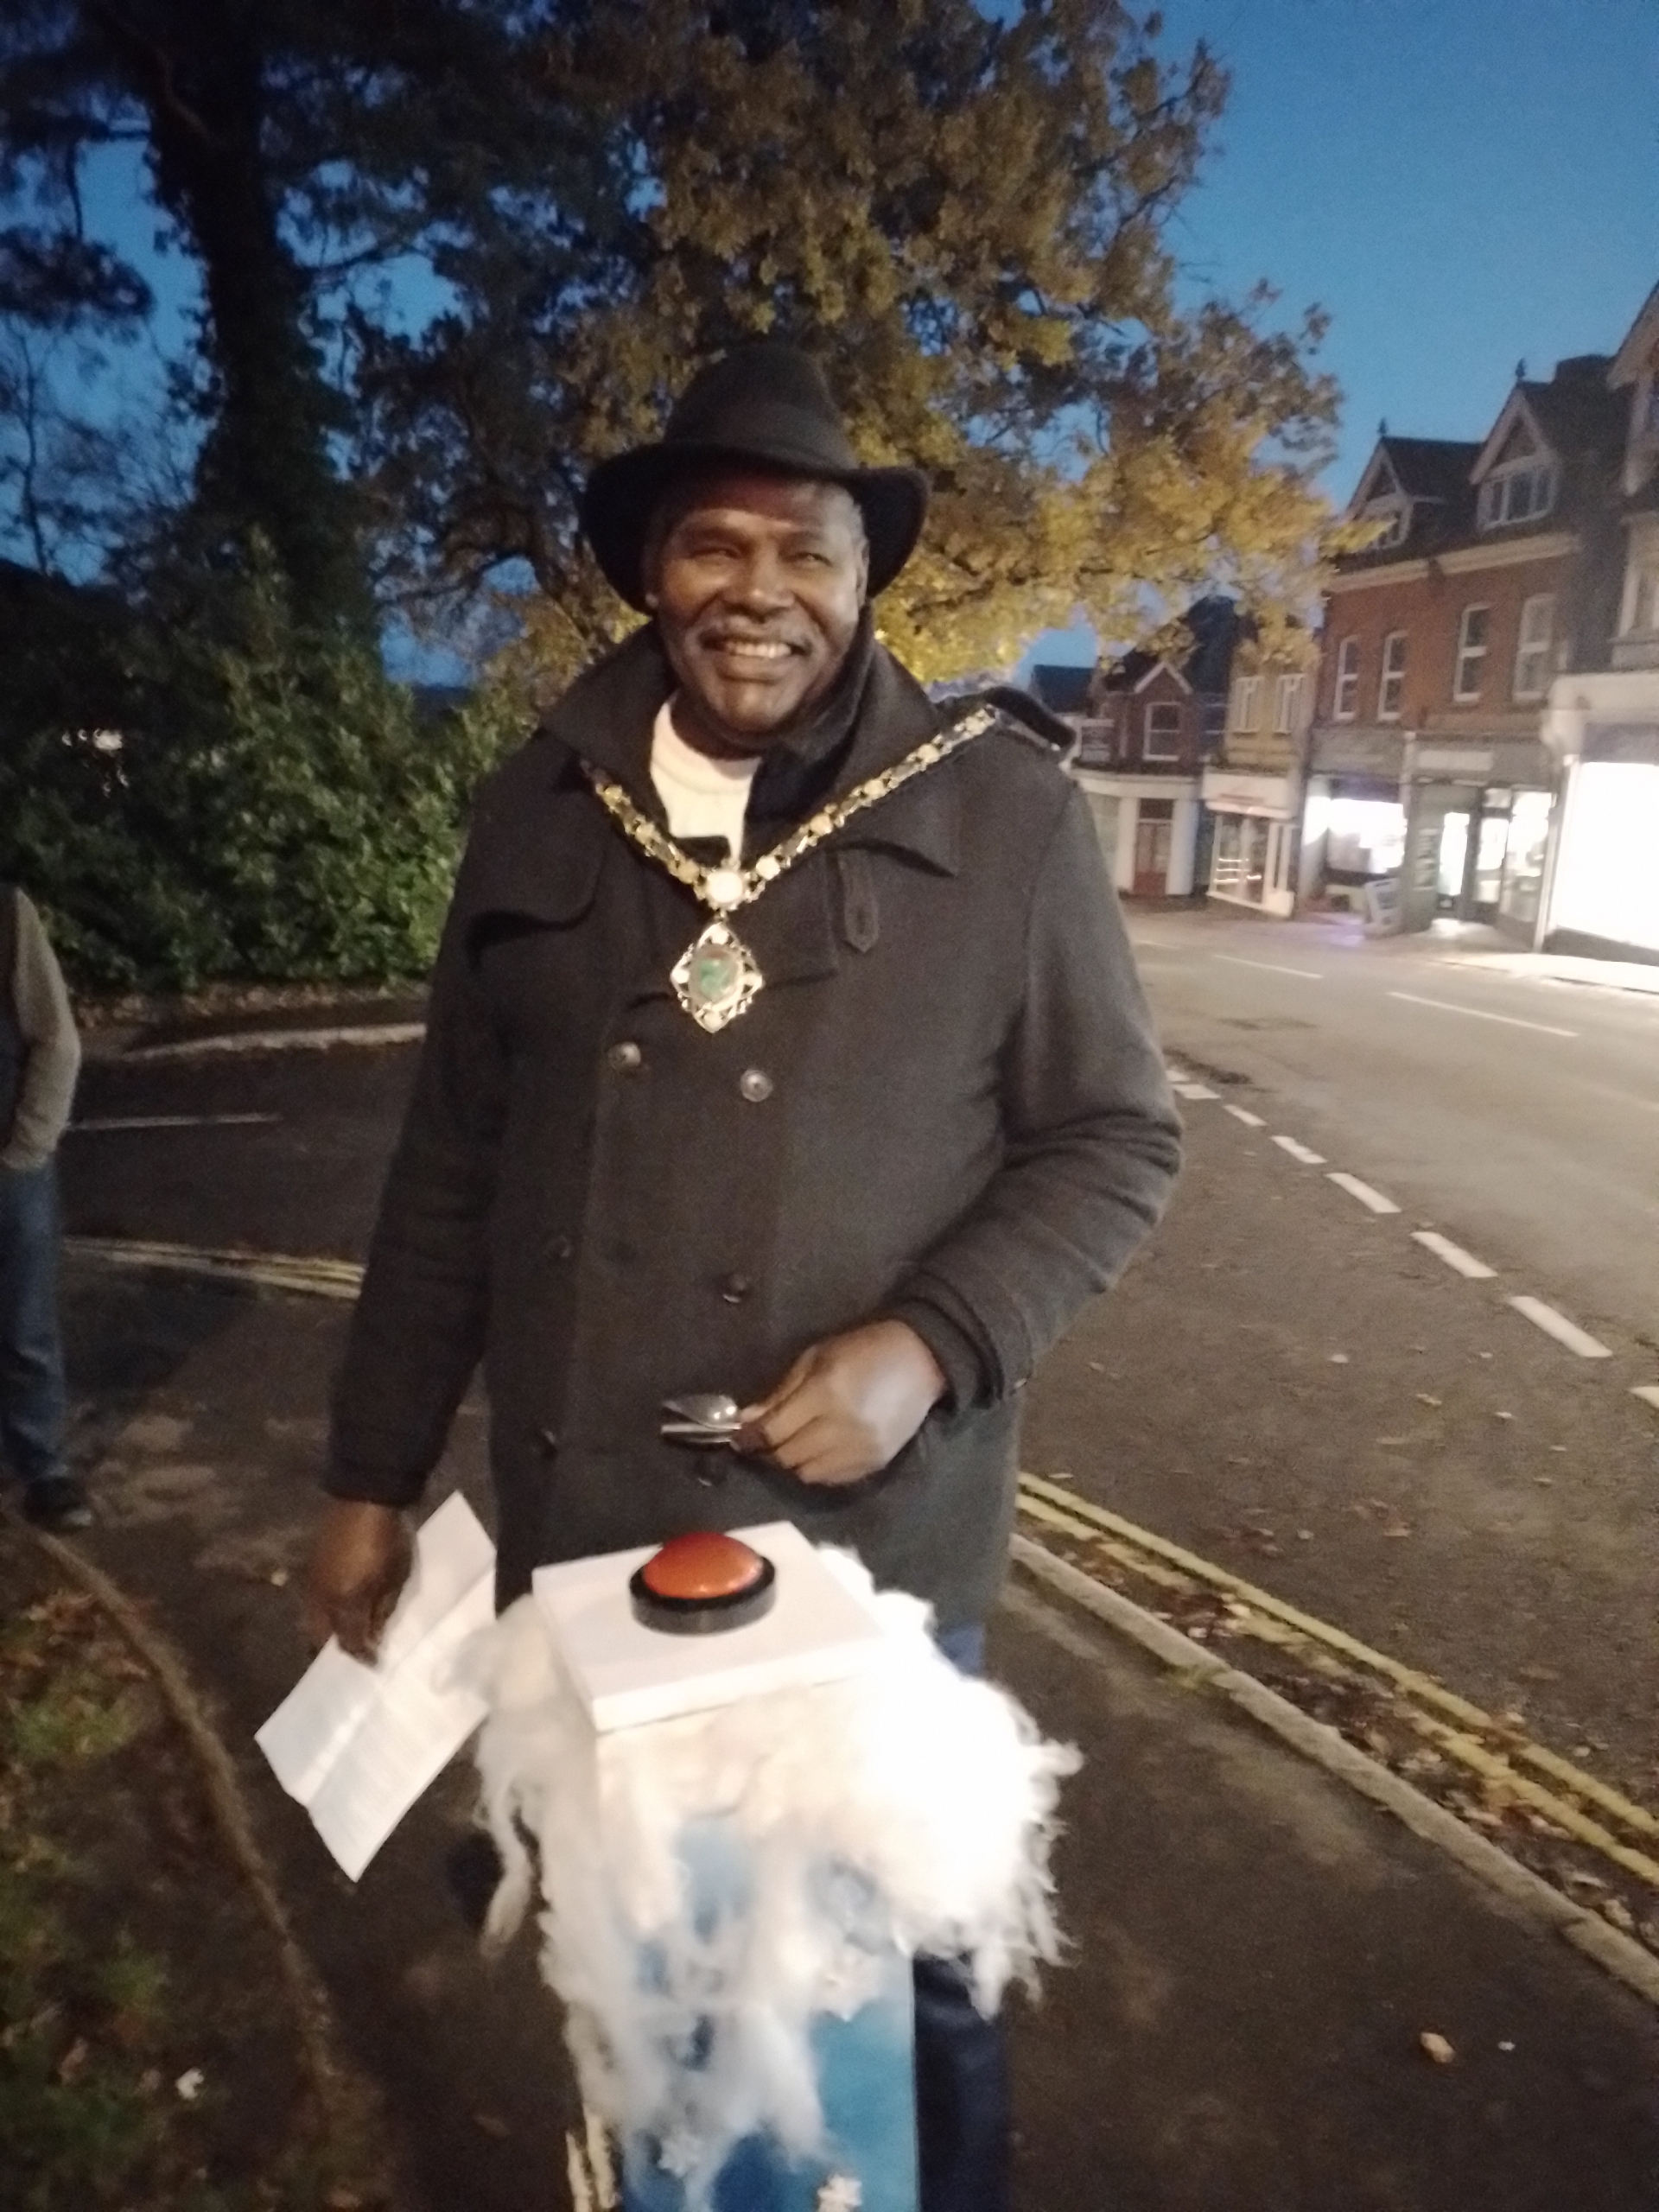 Town Mayor with buzzer and Christmas lights